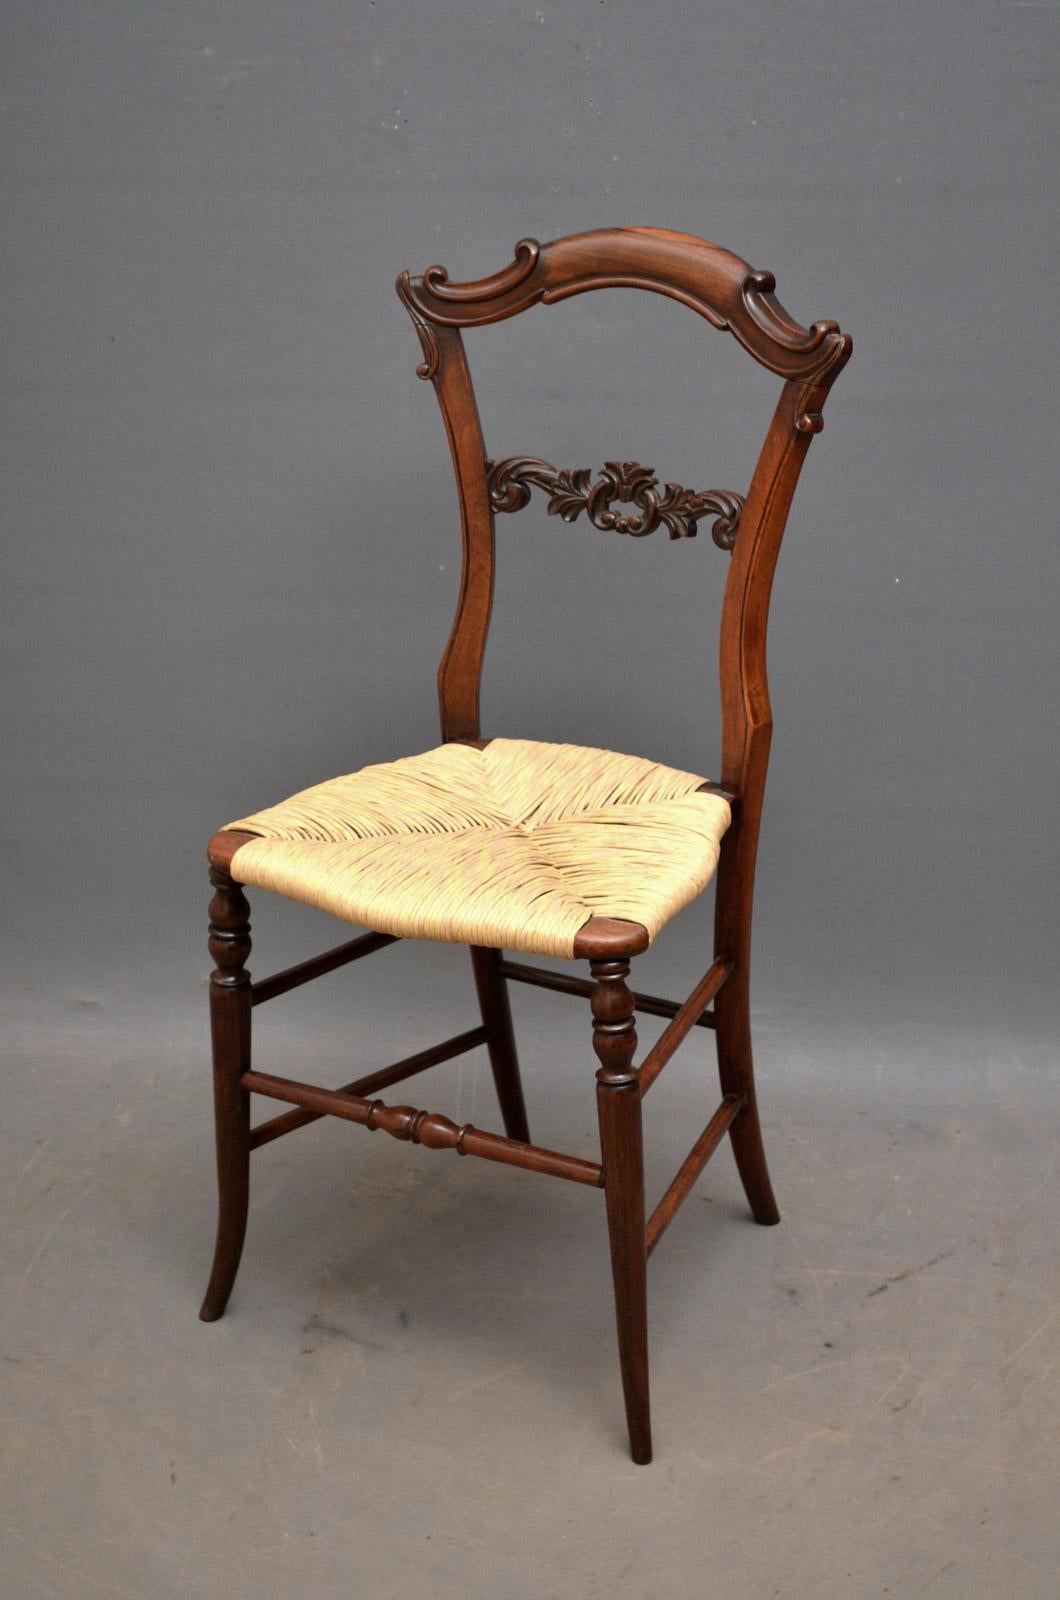 Sn863, a fine set of six early Victorian solid rosewood chairs, having carved shaped top rail with decorative carved mid rail and new rush seats, standing on slim elegant turned and outswept leg with double stretchers. This set of antique chairs